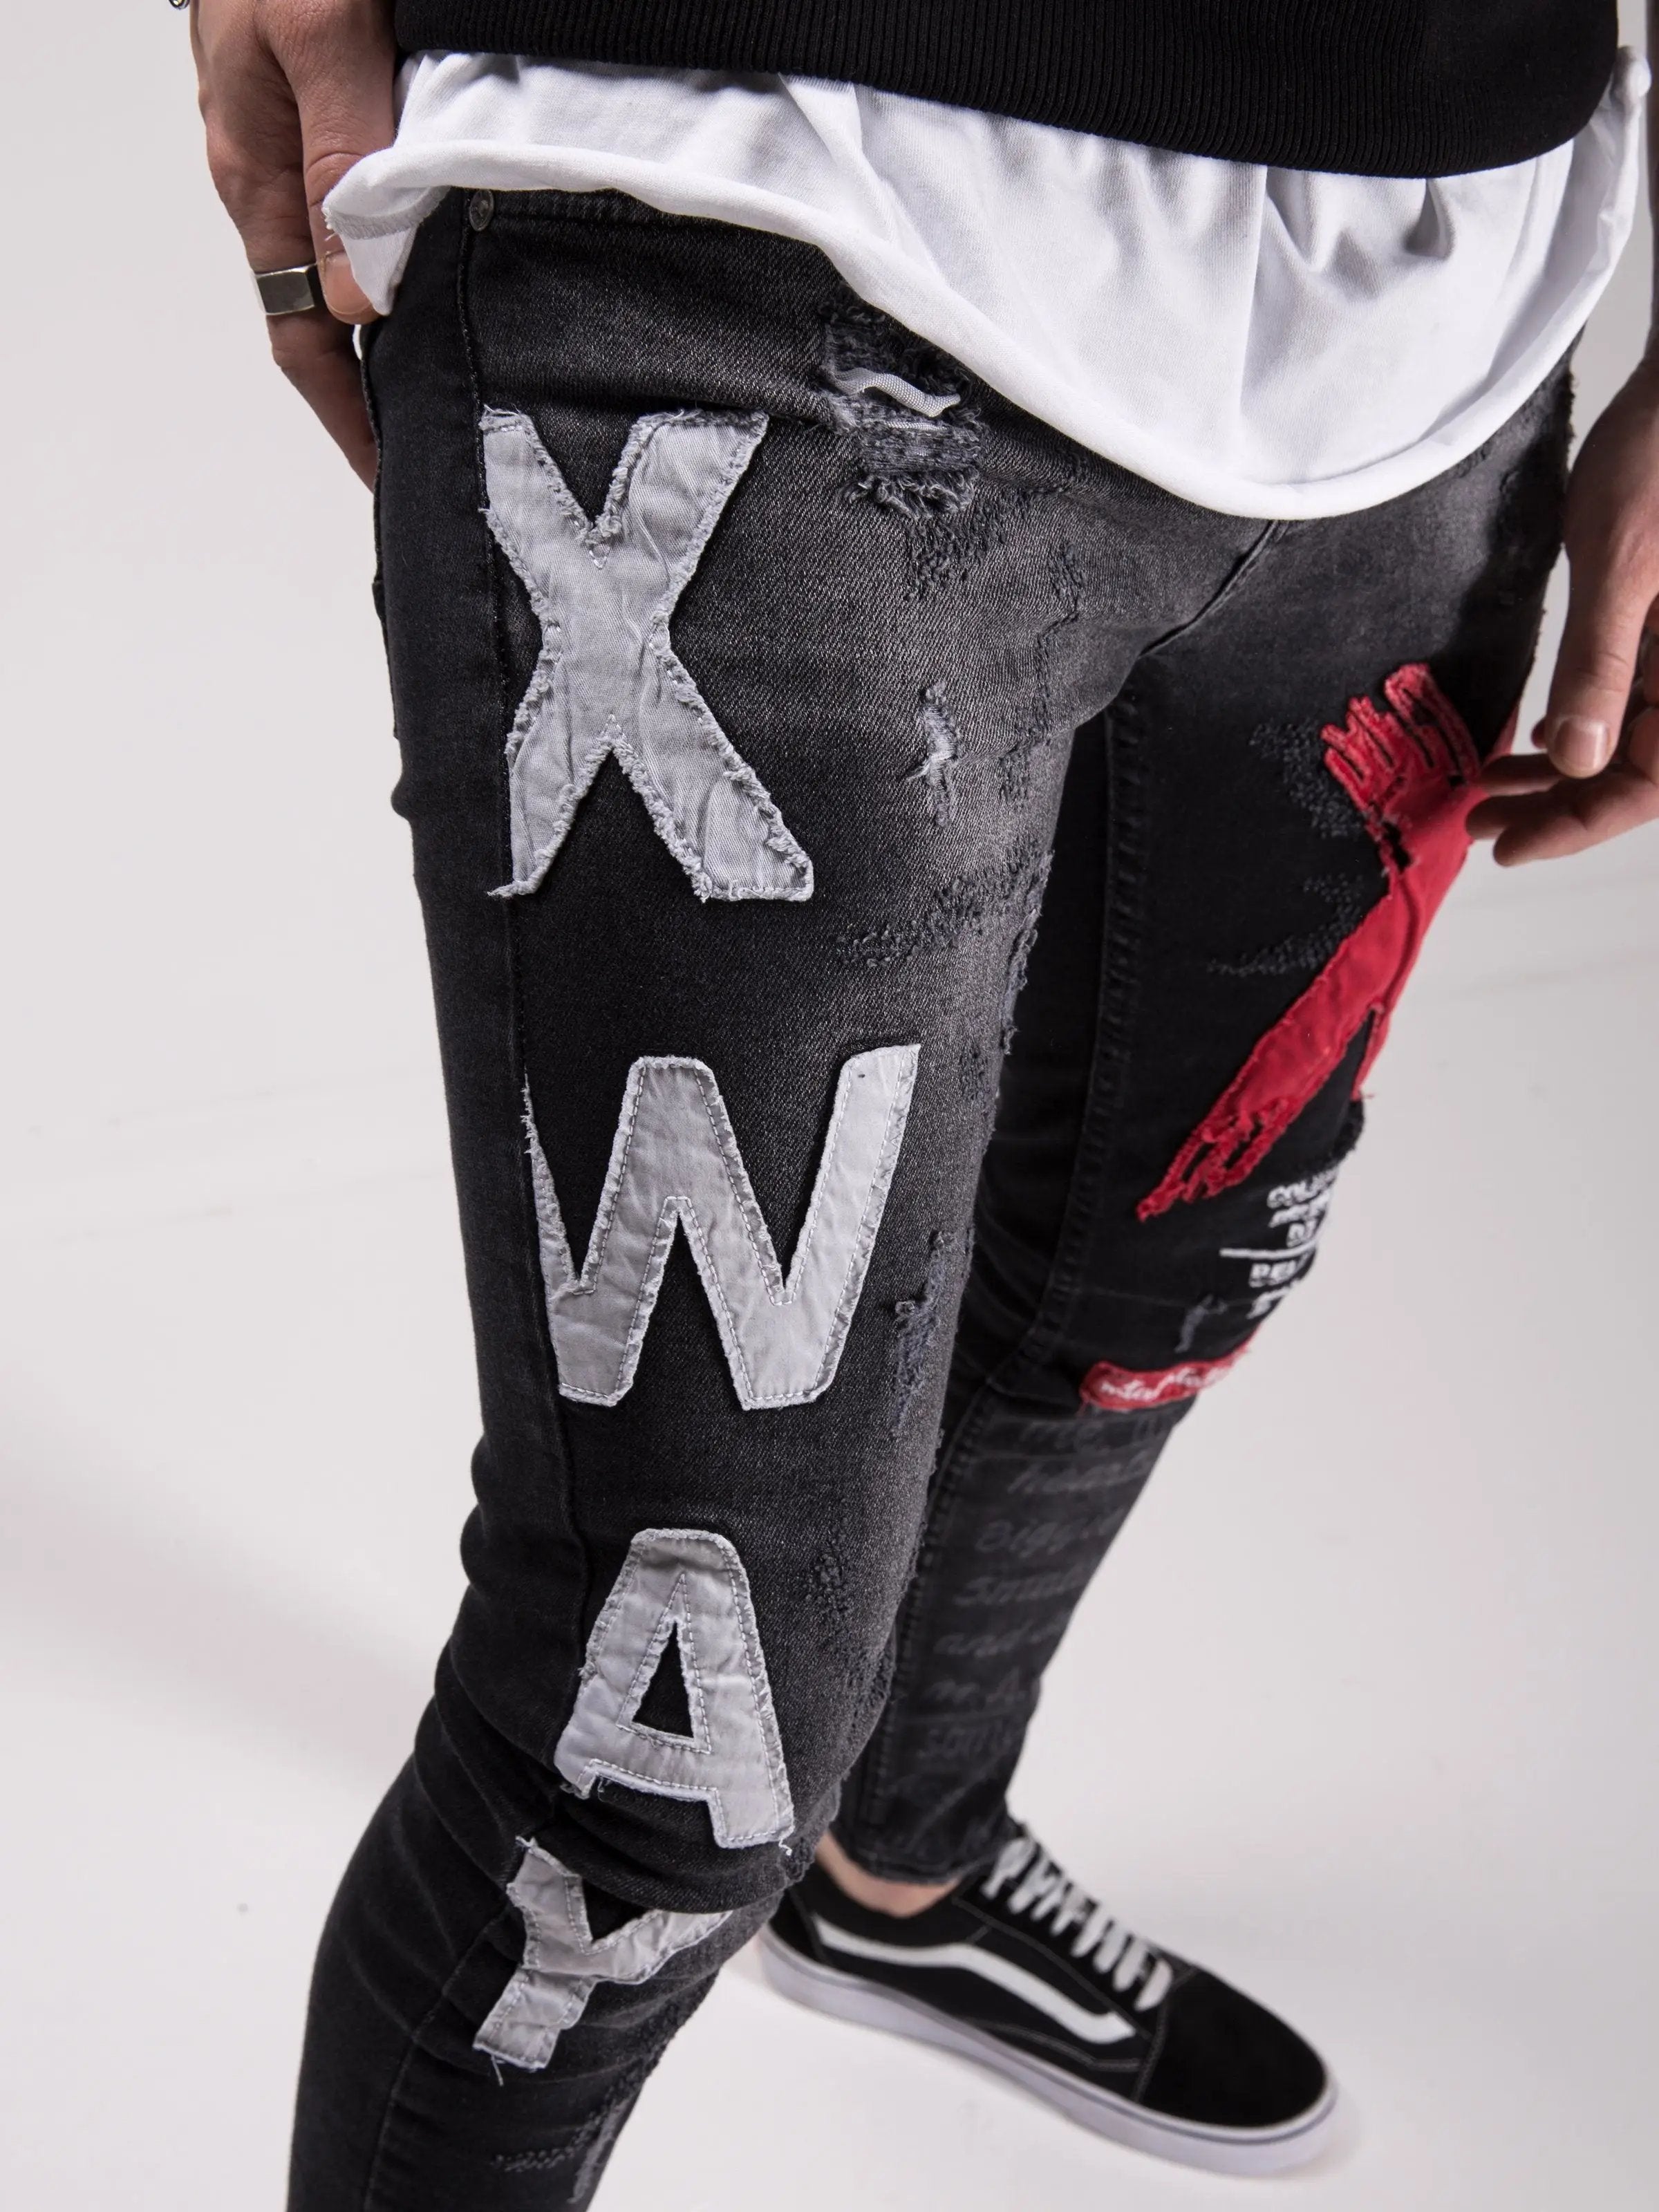 A man wearing a pair of MAD DOG skinny fit jeans with the word xway written on them.